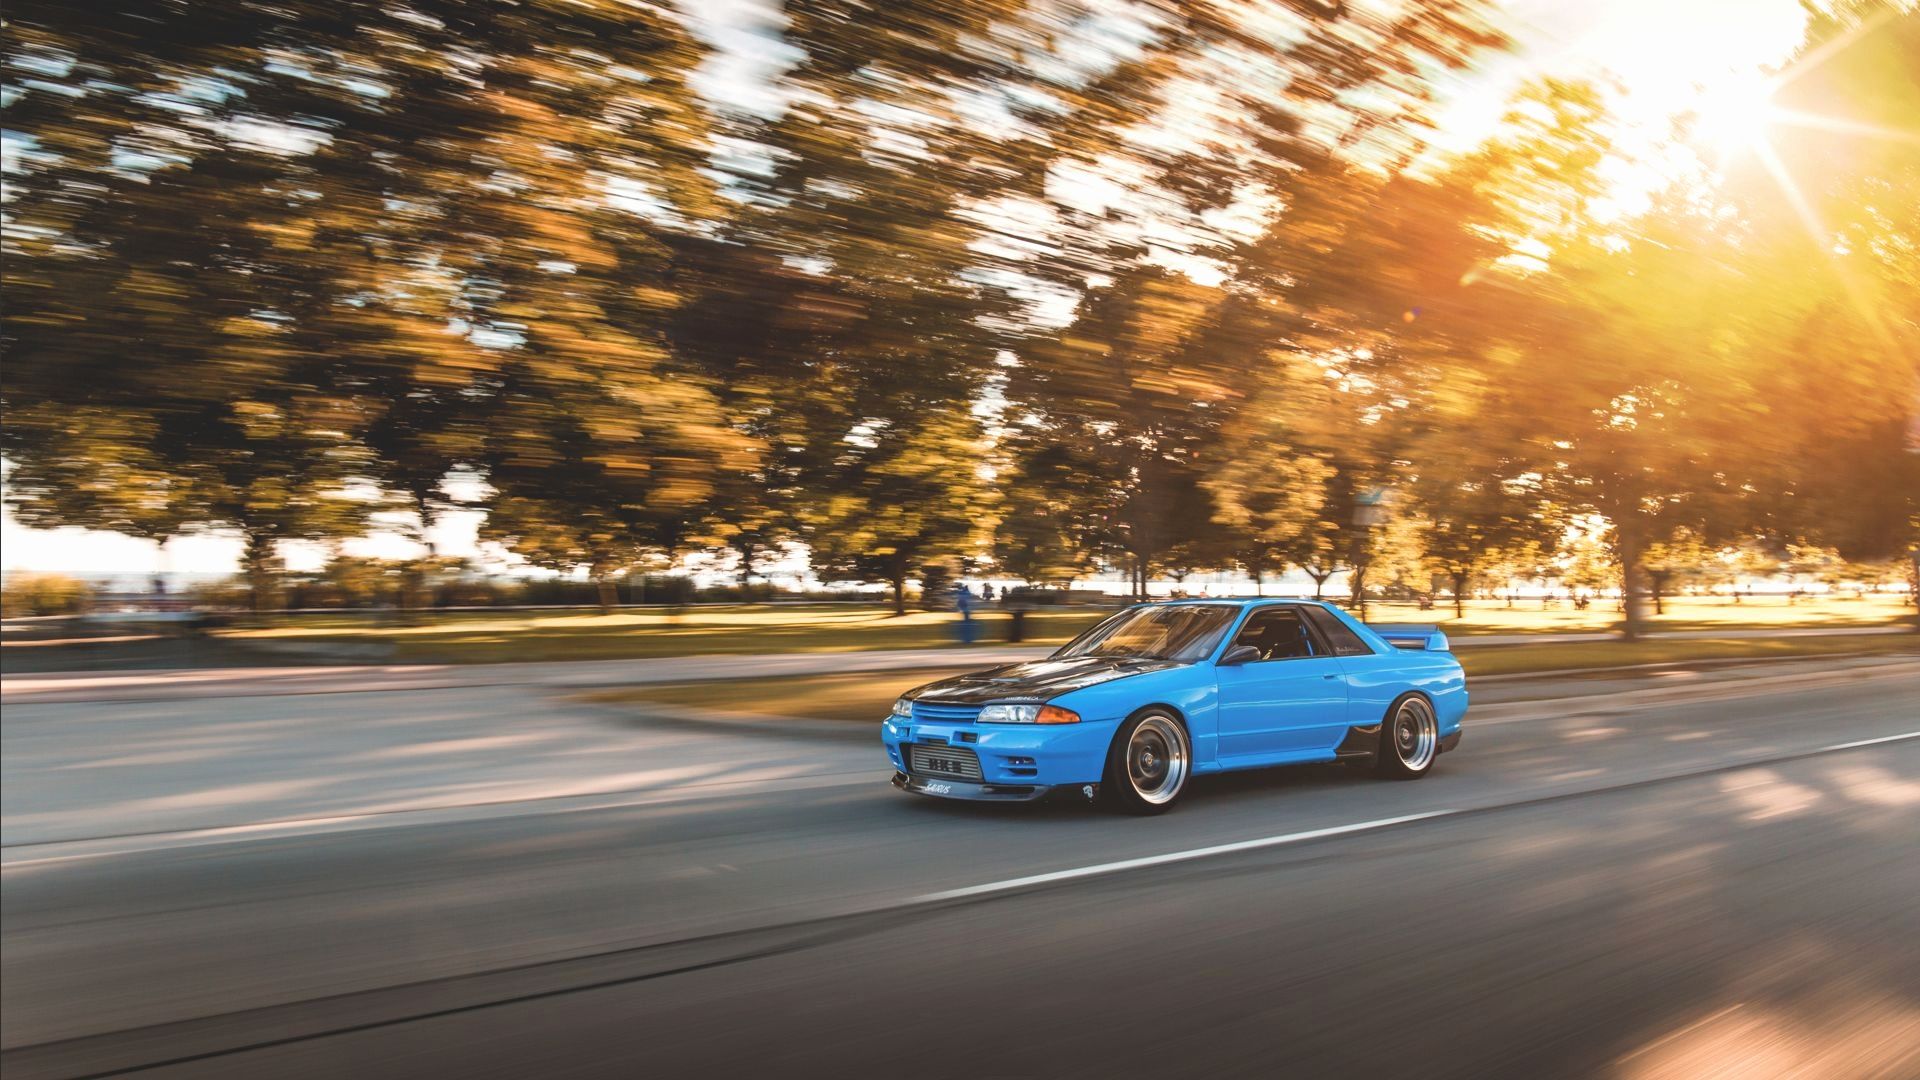 R32 Skyline Wallpaper Awesome Gtr R32 Wallpaper Of the Day of The Hudson